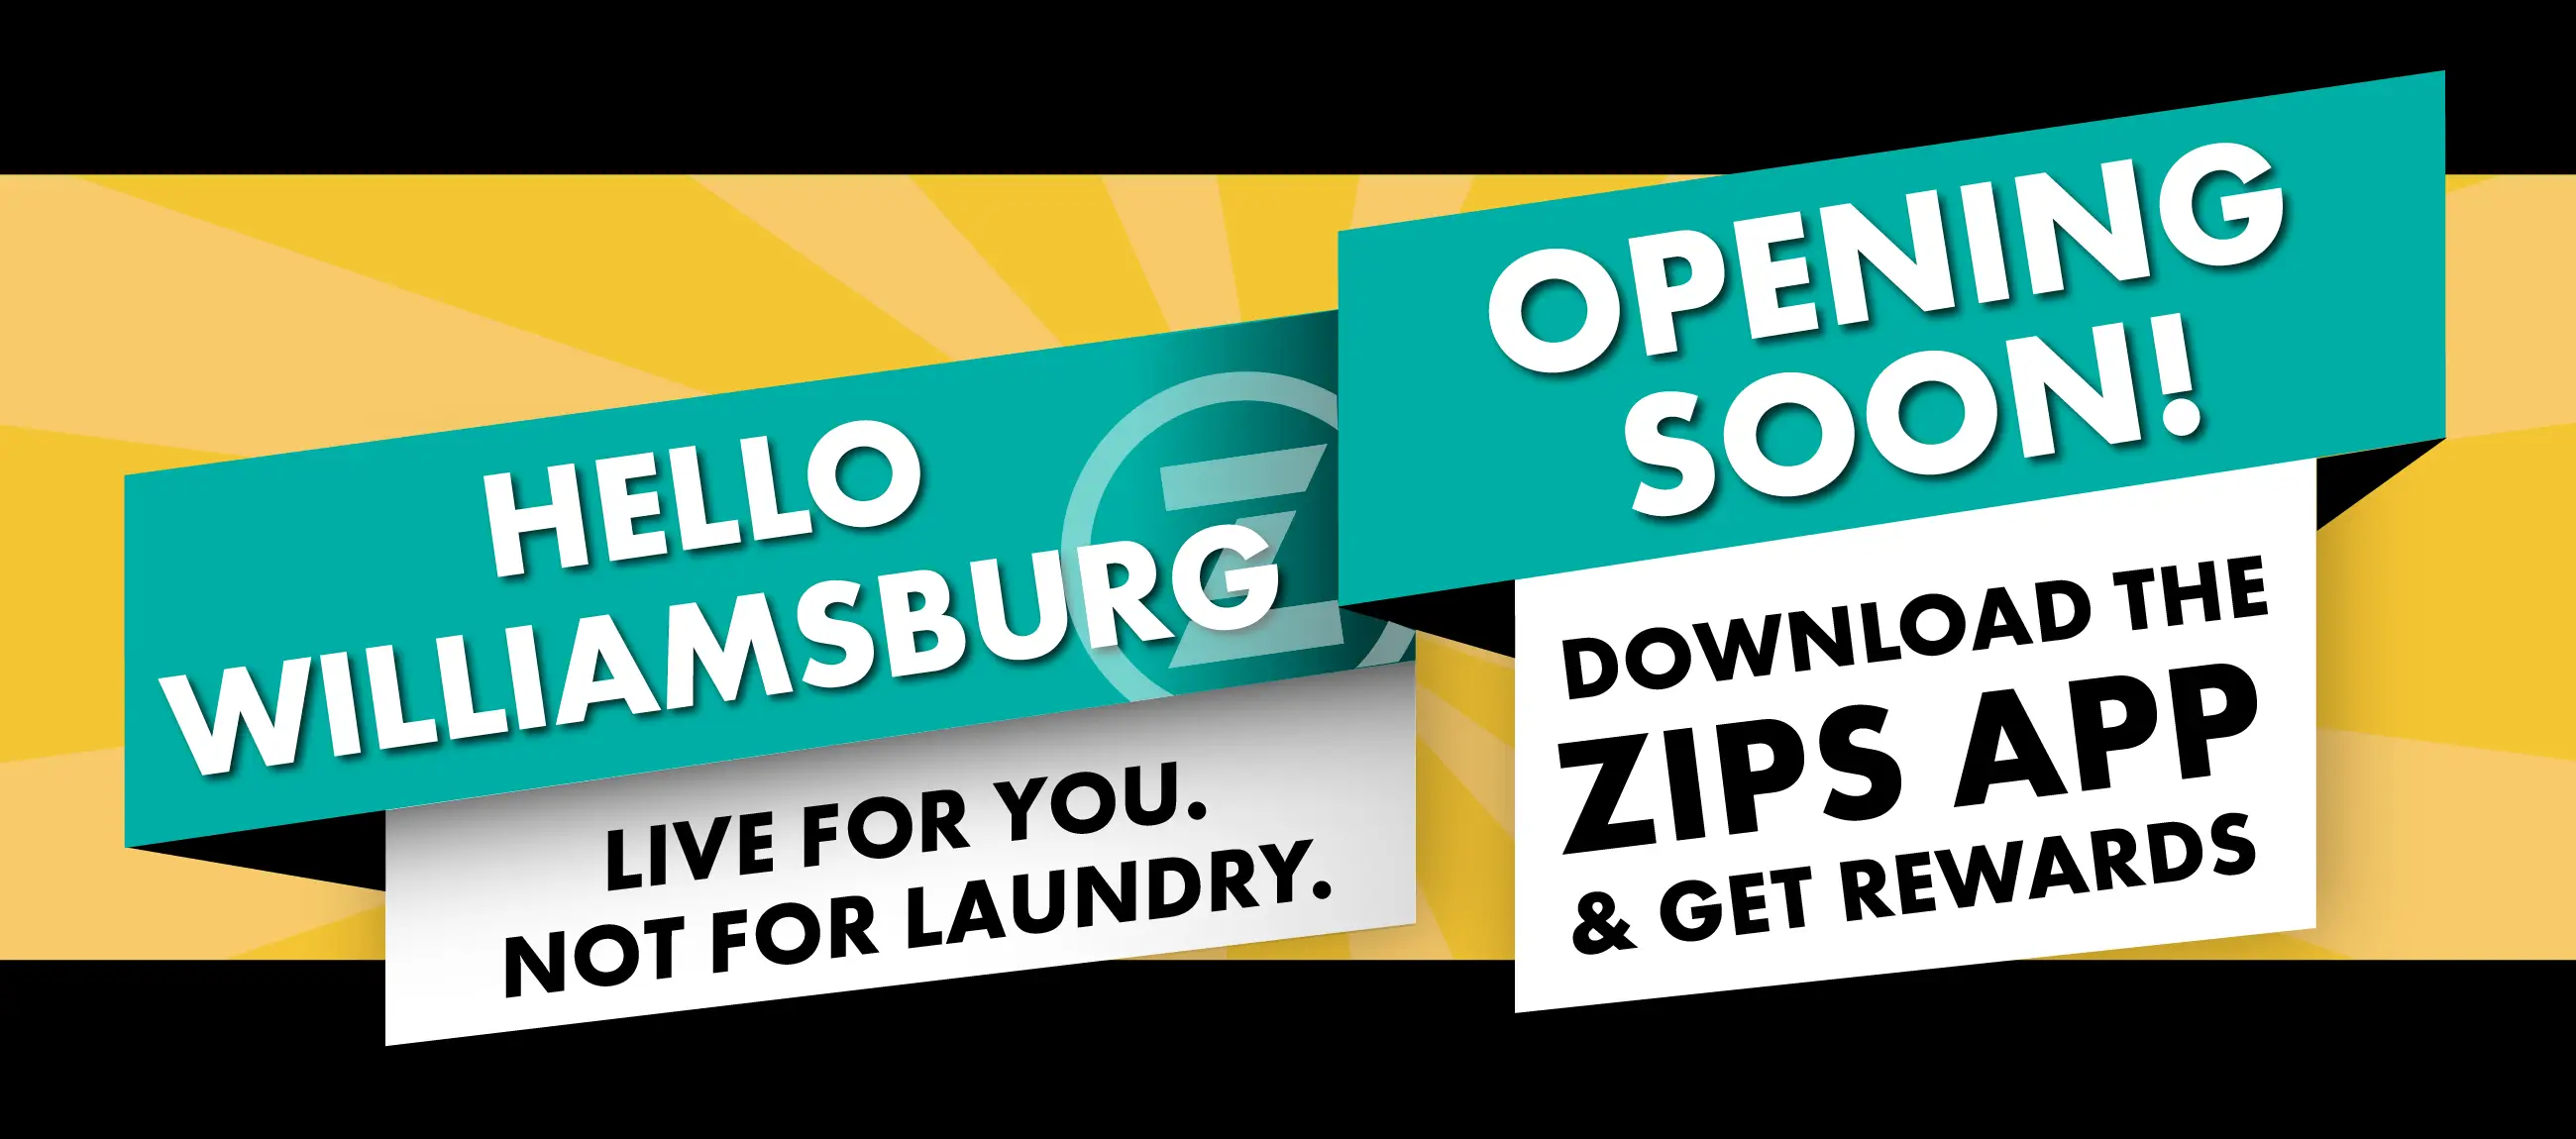 HELLO WILLIAMSBURG. OPENING SOON! LIVE FOR YOU NOT FOR LAUNDRY. DOWNLOAD THE ZIPS APP & GET REWARDS.